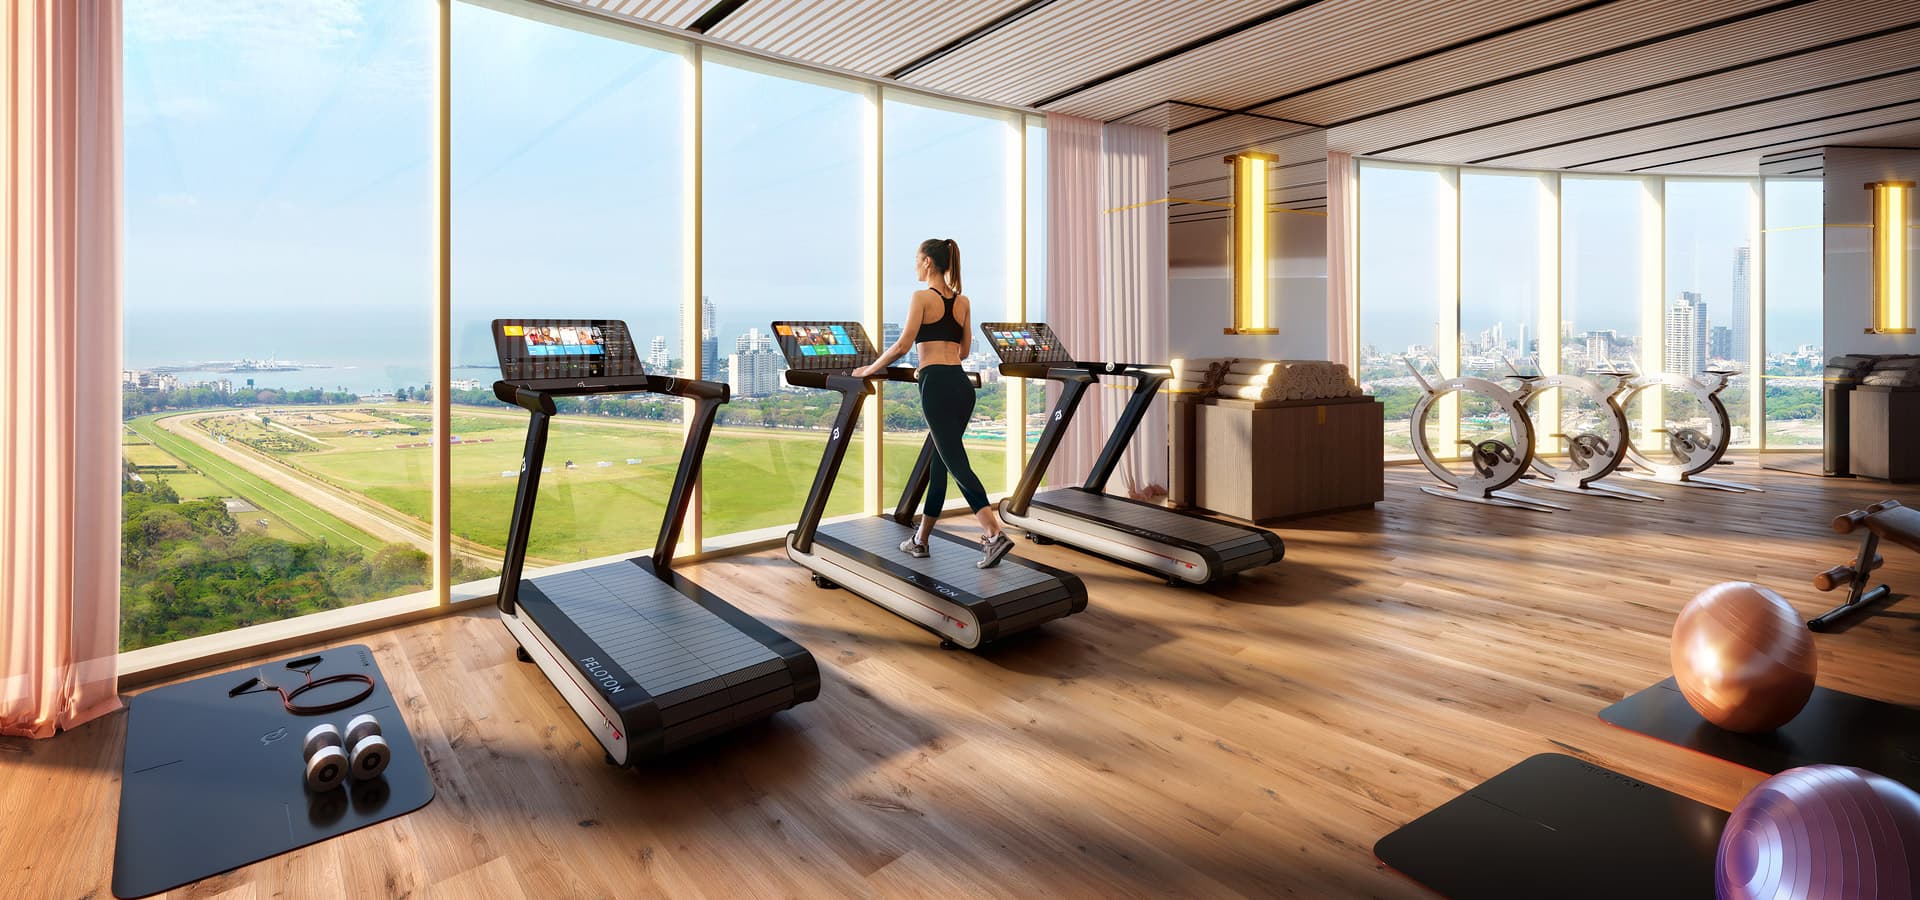 Well-equipped Fitness Centre for health and wellness at Piramal Mahalaxmi